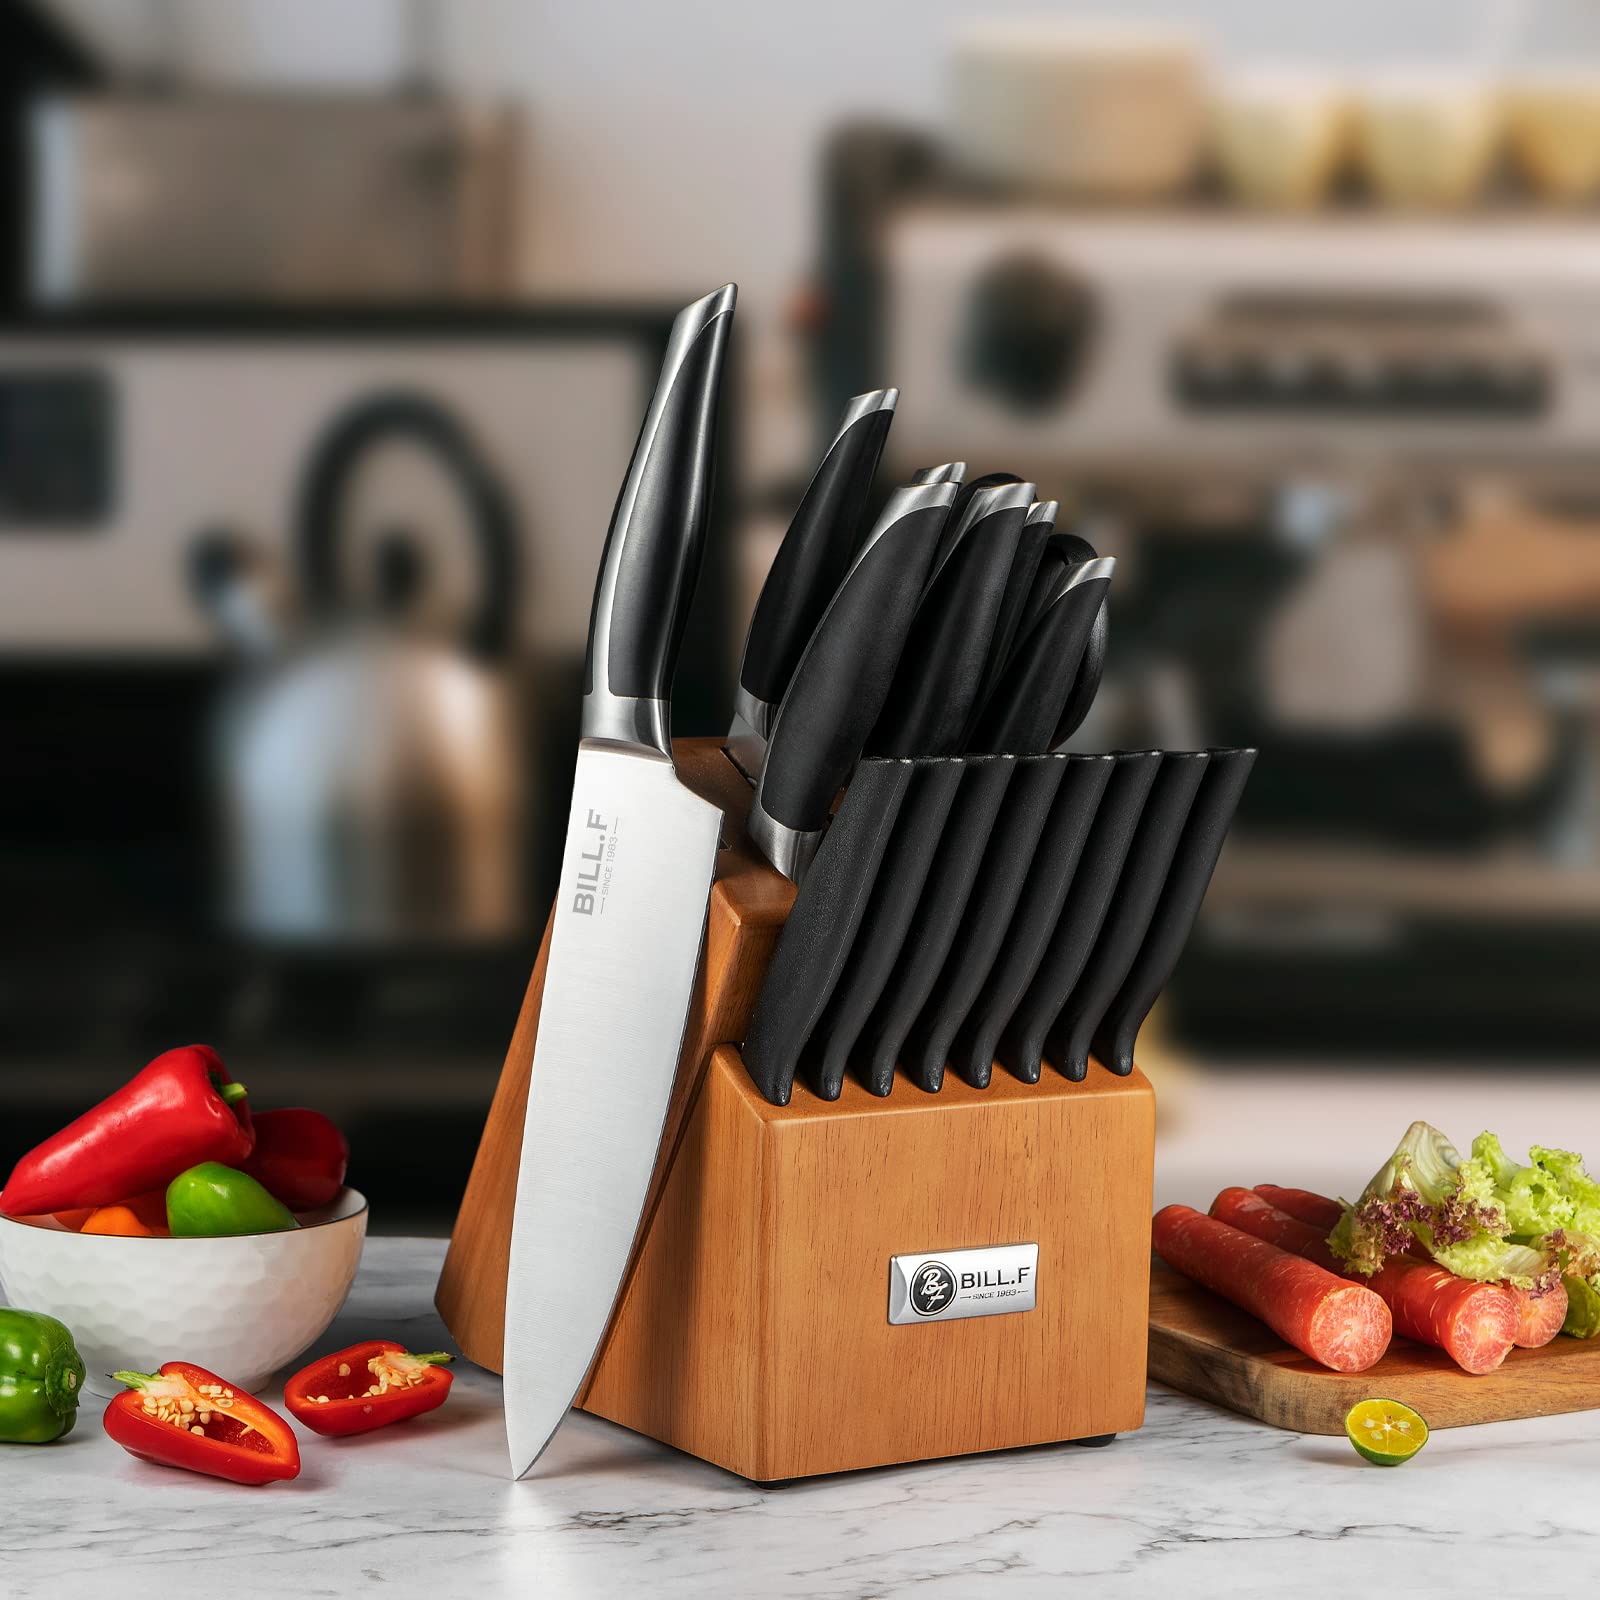 Chicago Cutlery Knife Block With In-Block Knife Sharpener Knives